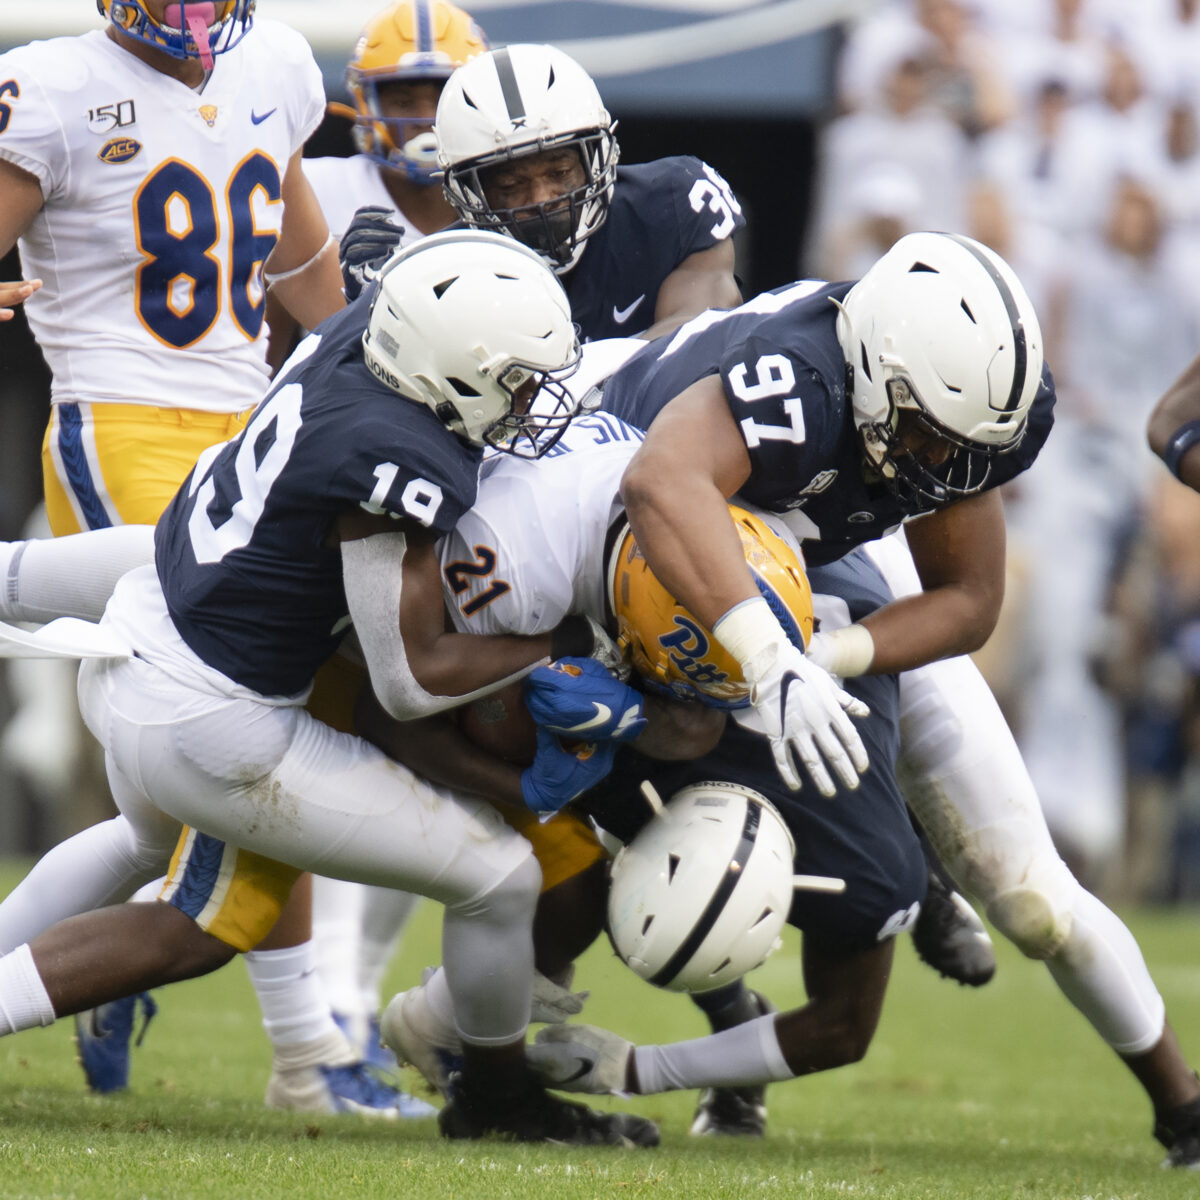 ESPN not too high on future defensive outlook for Penn State defense